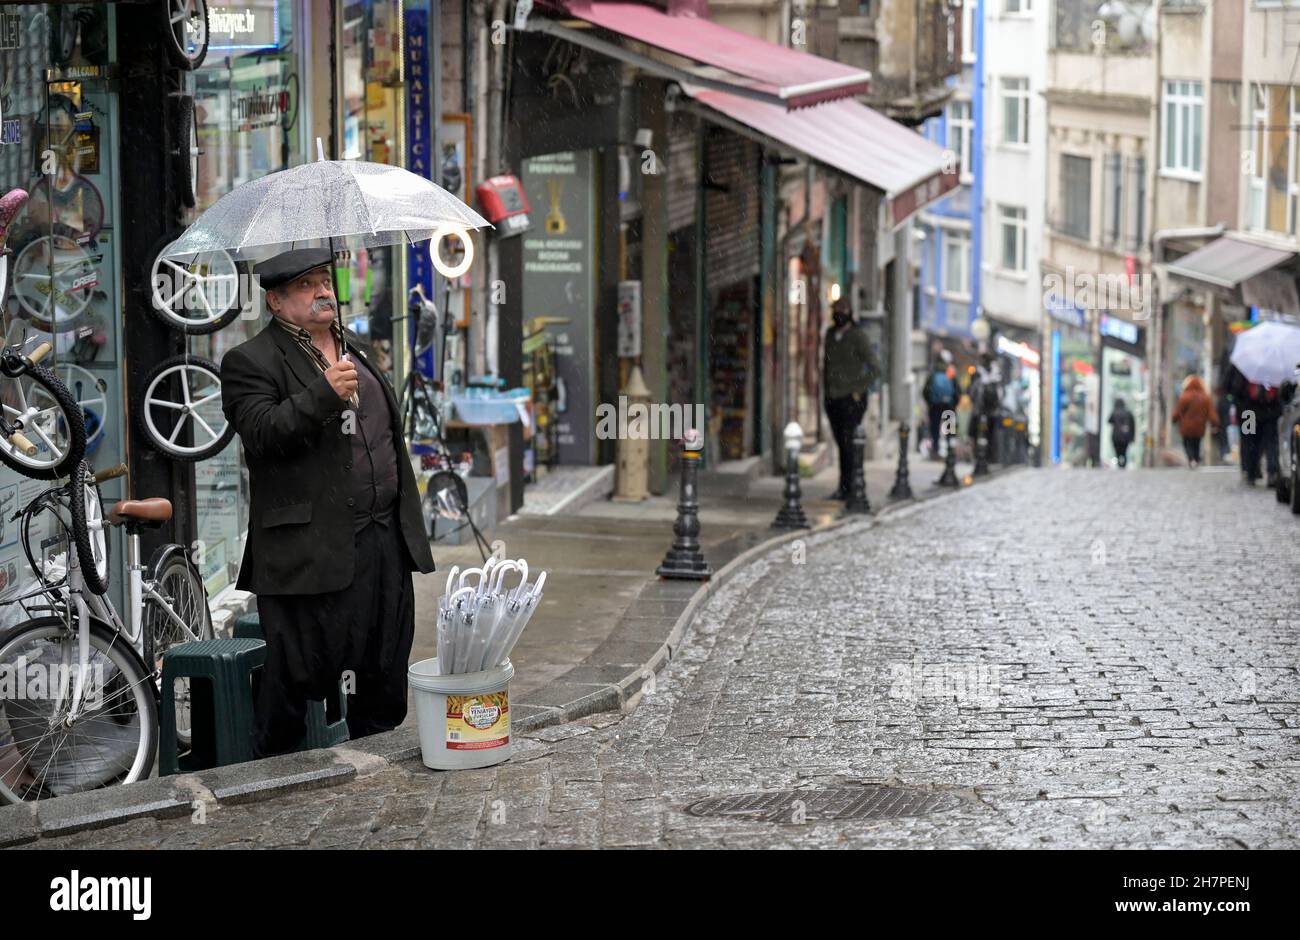 Page 3 - Regenschirm High Resolution Stock Photography and Images - Alamy